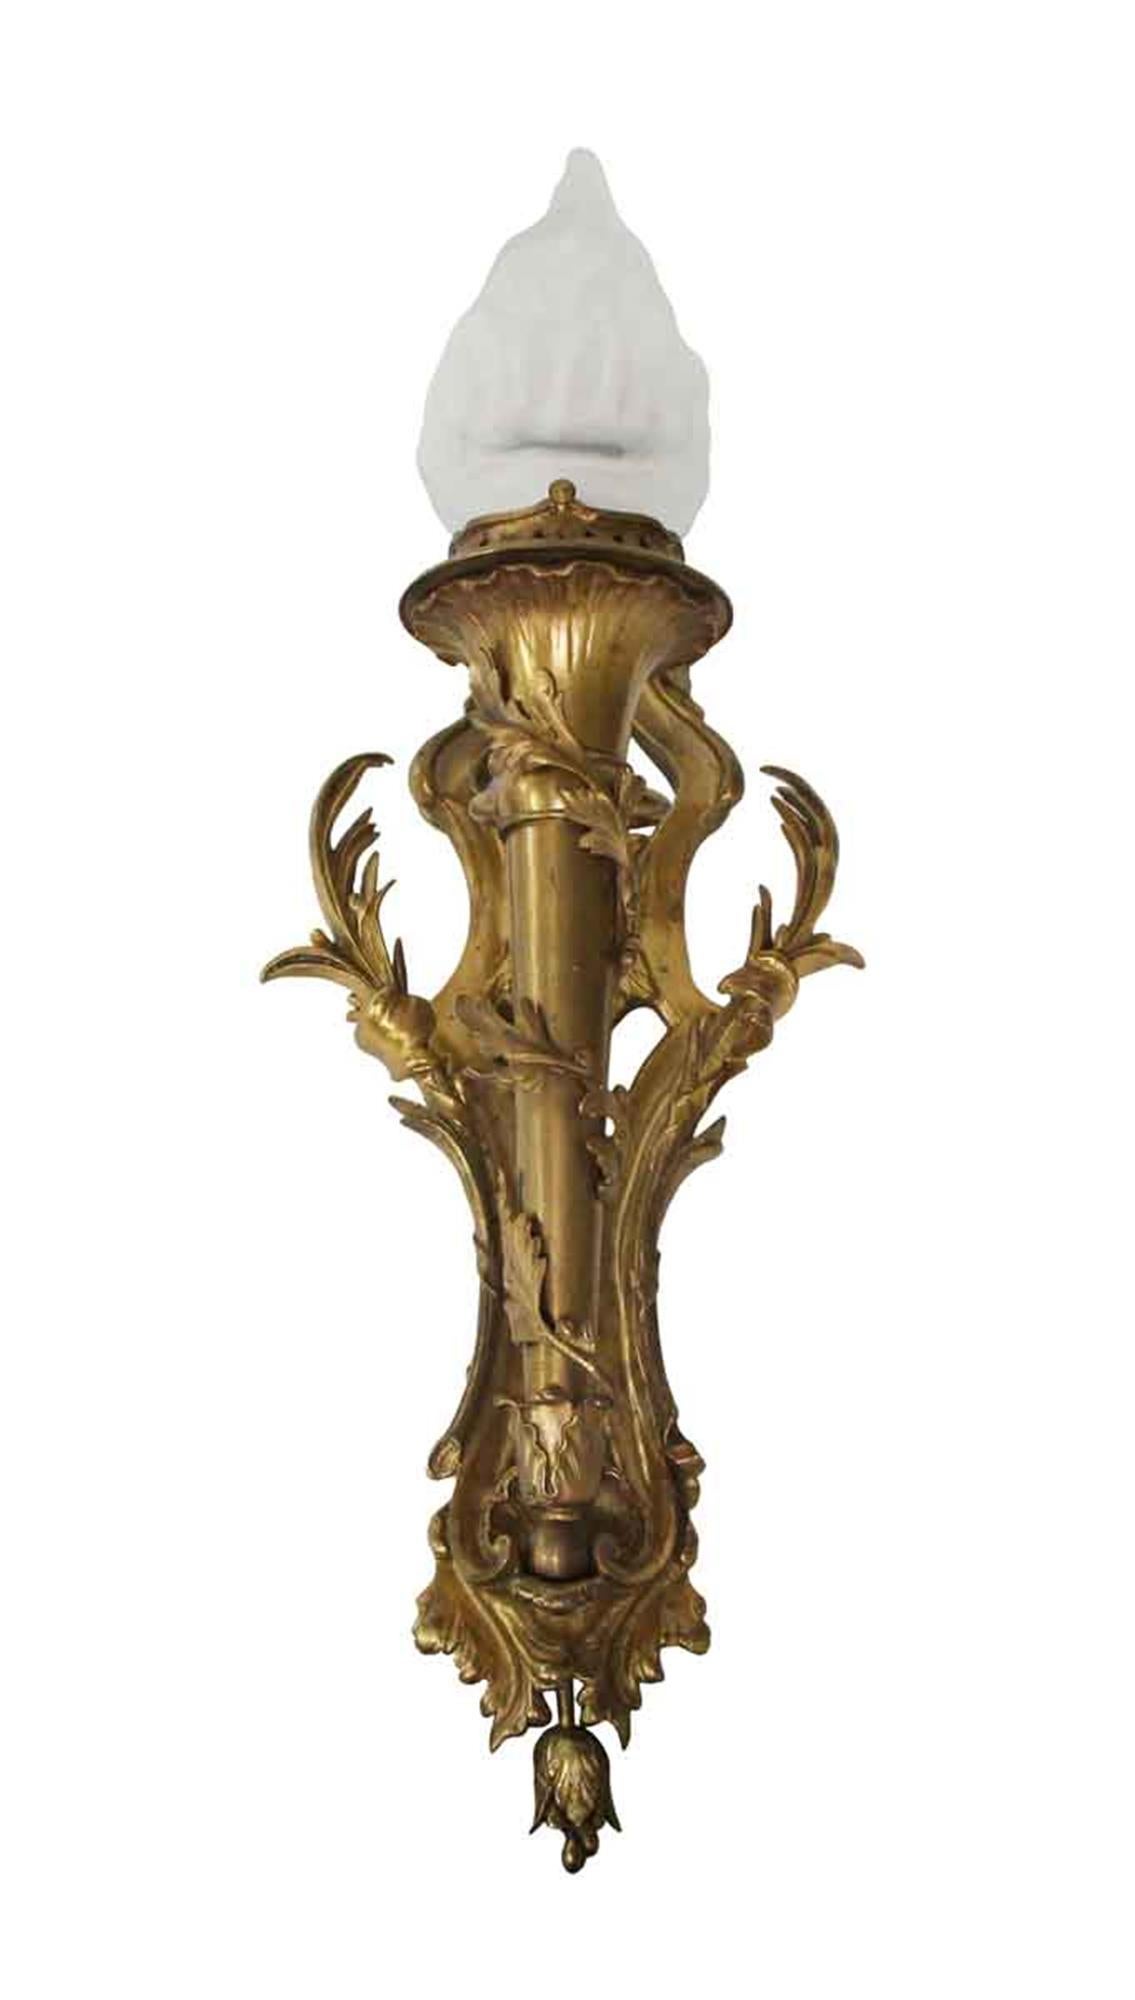 Highly ornate pair of gorgeous gilded bronze sconces with frosted torch flame shades. Priced as a pair. This can be seen at our 302 Bowery location in Manhattan.